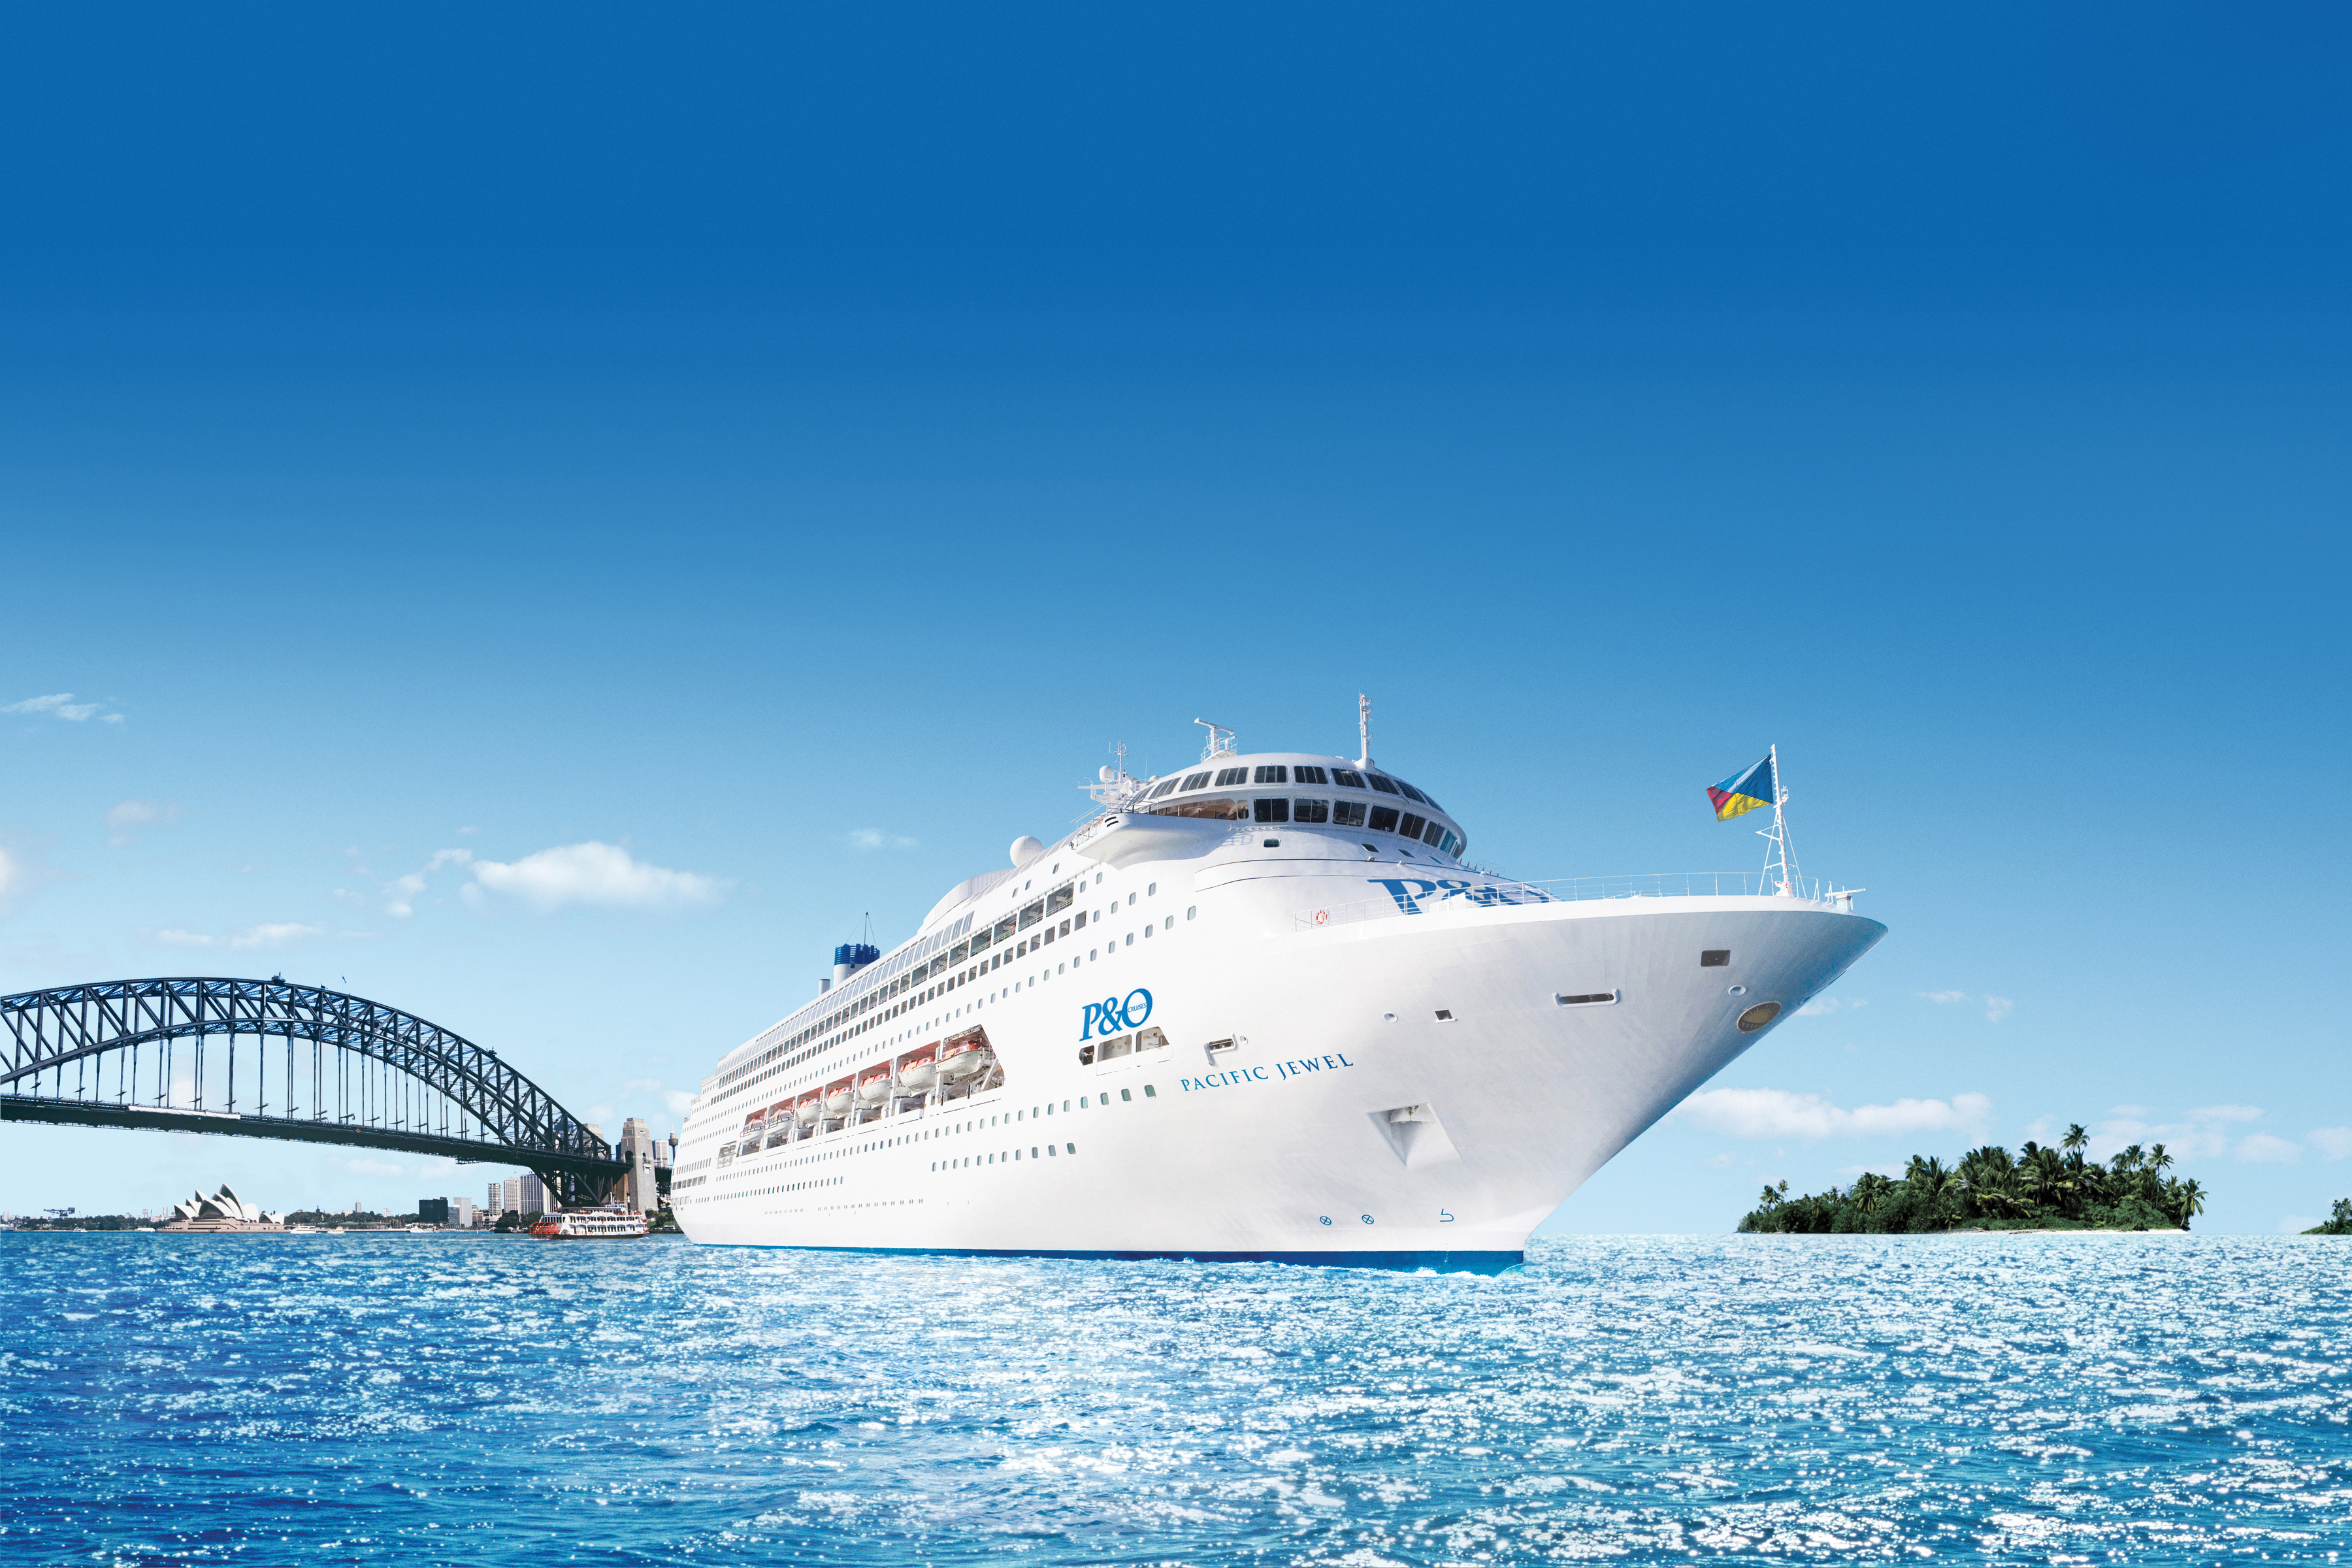 Pacific Jewel is part of the P&O Cruises’ fleet of three ships currently based in Australia. In its biggest ever single fleet expansion, P&O Cruises will welcome two more ships next year to make it the largest fleet of cruise ships home-ported year round in Australia.